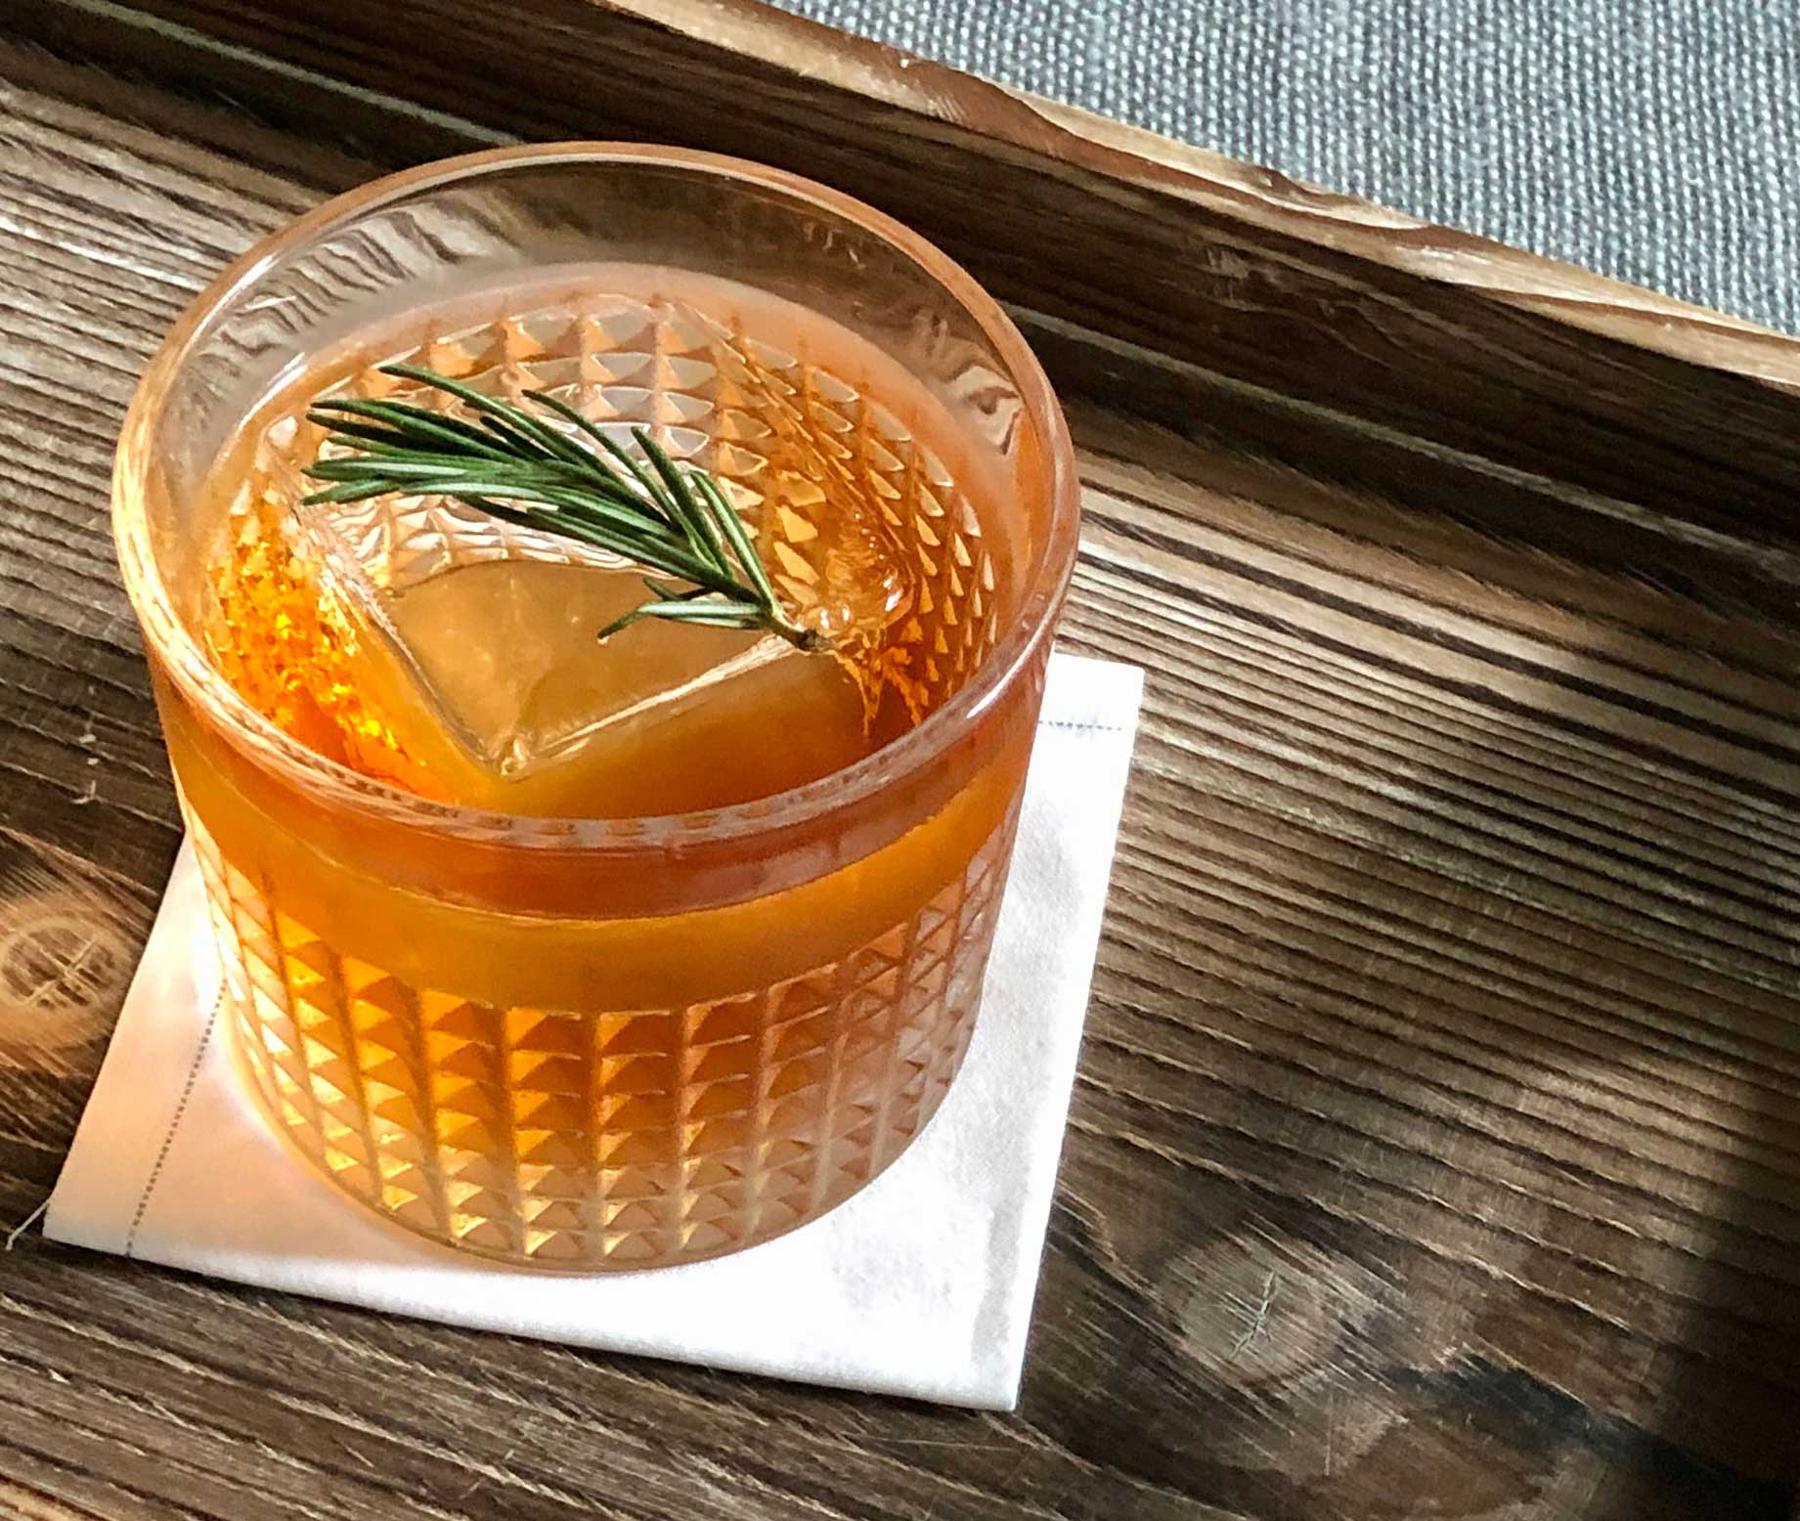 An example of the Schleswig Limbo, the mixed drink (drink), adapted from a drink by Luiggi Uzcategui, Big Orange, Little Rock, Arkansas, featuring Purkhart Pear Williams Eau-de-Vie, The Scarlet Ibis Trinidad Rum, Rothman & Winter Orchard Cherry Liqueur, Aperitivo Cappelletti, and sprig of rosemary; photo by Lee Edwards